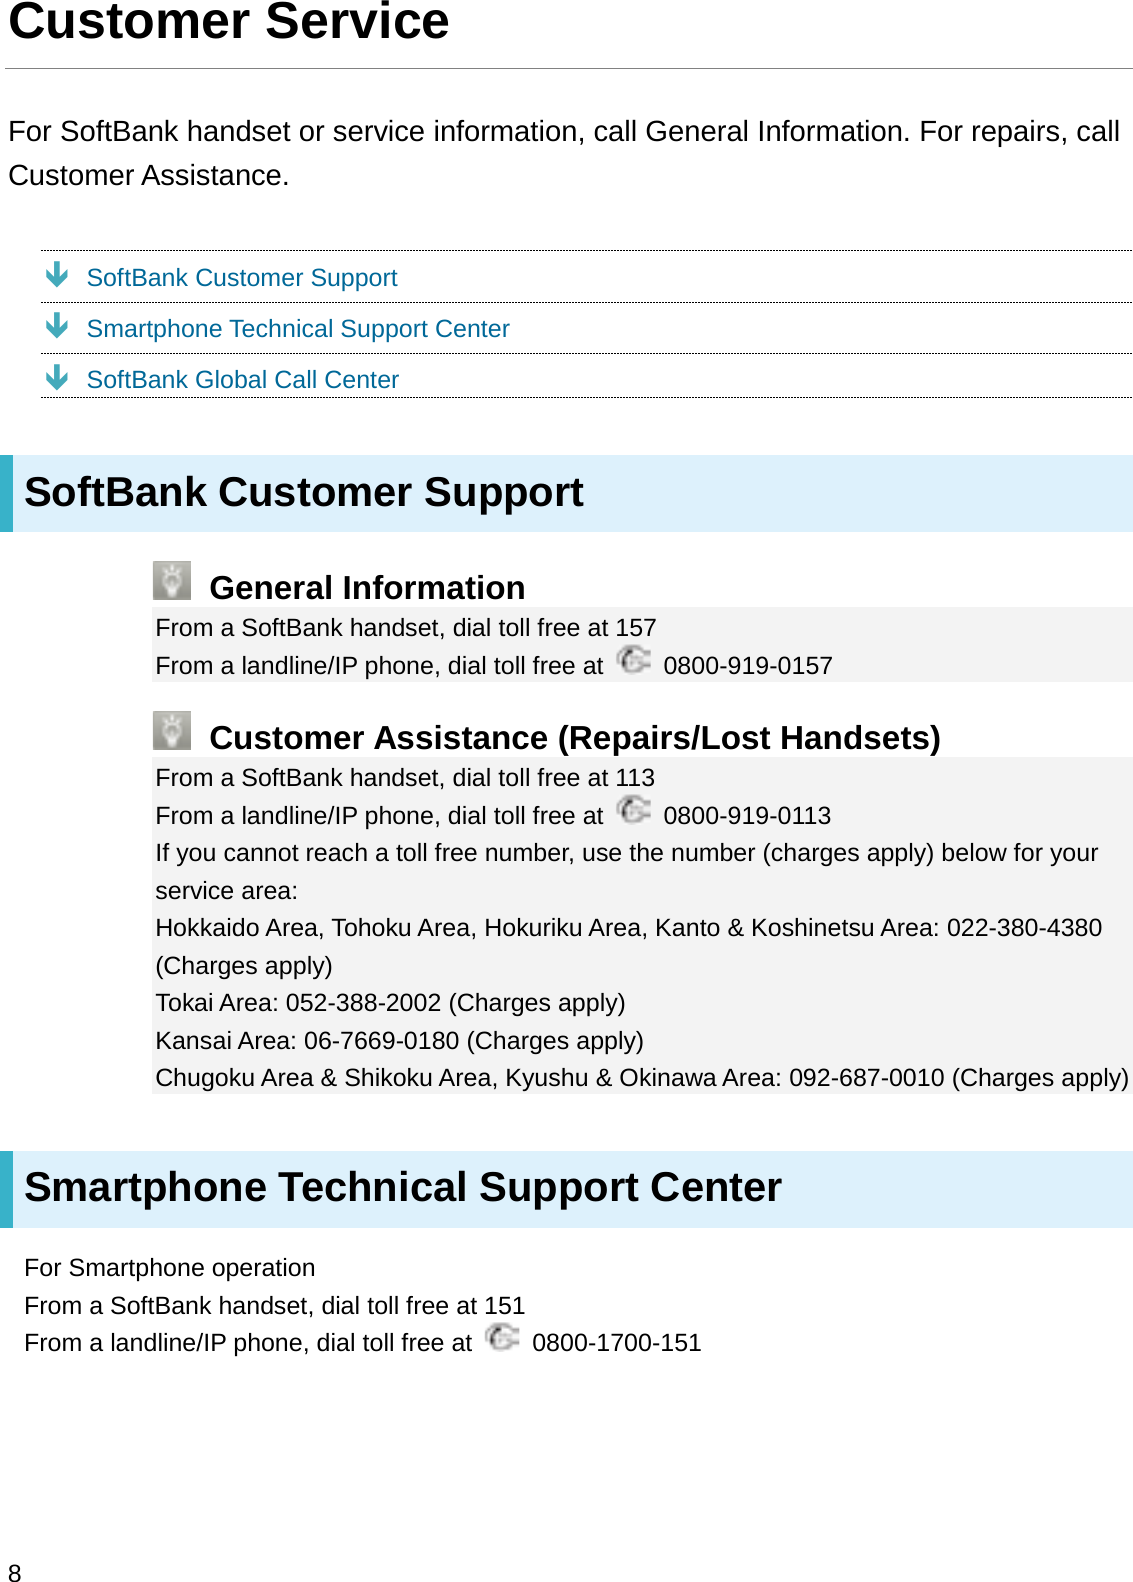 Customer ServiceFor SoftBank handset or service information, call General Information. For repairs, call Customer Assistance.ÐSoftBank Customer SupportÐSmartphone Technical Support CenterÐSoftBank Global Call CenterSoftBank Customer SupportGeneral InformationFrom a SoftBank handset, dial toll free at 157From a landline/IP phone, dial toll free at  0800-919-0157Customer Assistance (Repairs/Lost Handsets)From a SoftBank handset, dial toll free at 113From a landline/IP phone, dial toll free at  0800-919-0113If you cannot reach a toll free number, use the number (charges apply) below for your service area:Hokkaido Area, Tohoku Area, Hokuriku Area, Kanto &amp; Koshinetsu Area: 022-380-4380 (Charges apply)Tokai Area: 052-388-2002 (Charges apply)Kansai Area: 06-7669-0180 (Charges apply)Chugoku Area &amp; Shikoku Area, Kyushu &amp; Okinawa Area: 092-687-0010 (Charges apply)Smartphone Technical Support CenterFor Smartphone operationFrom a SoftBank handset, dial toll free at 151From a landline/IP phone, dial toll free at  0800-1700-1518